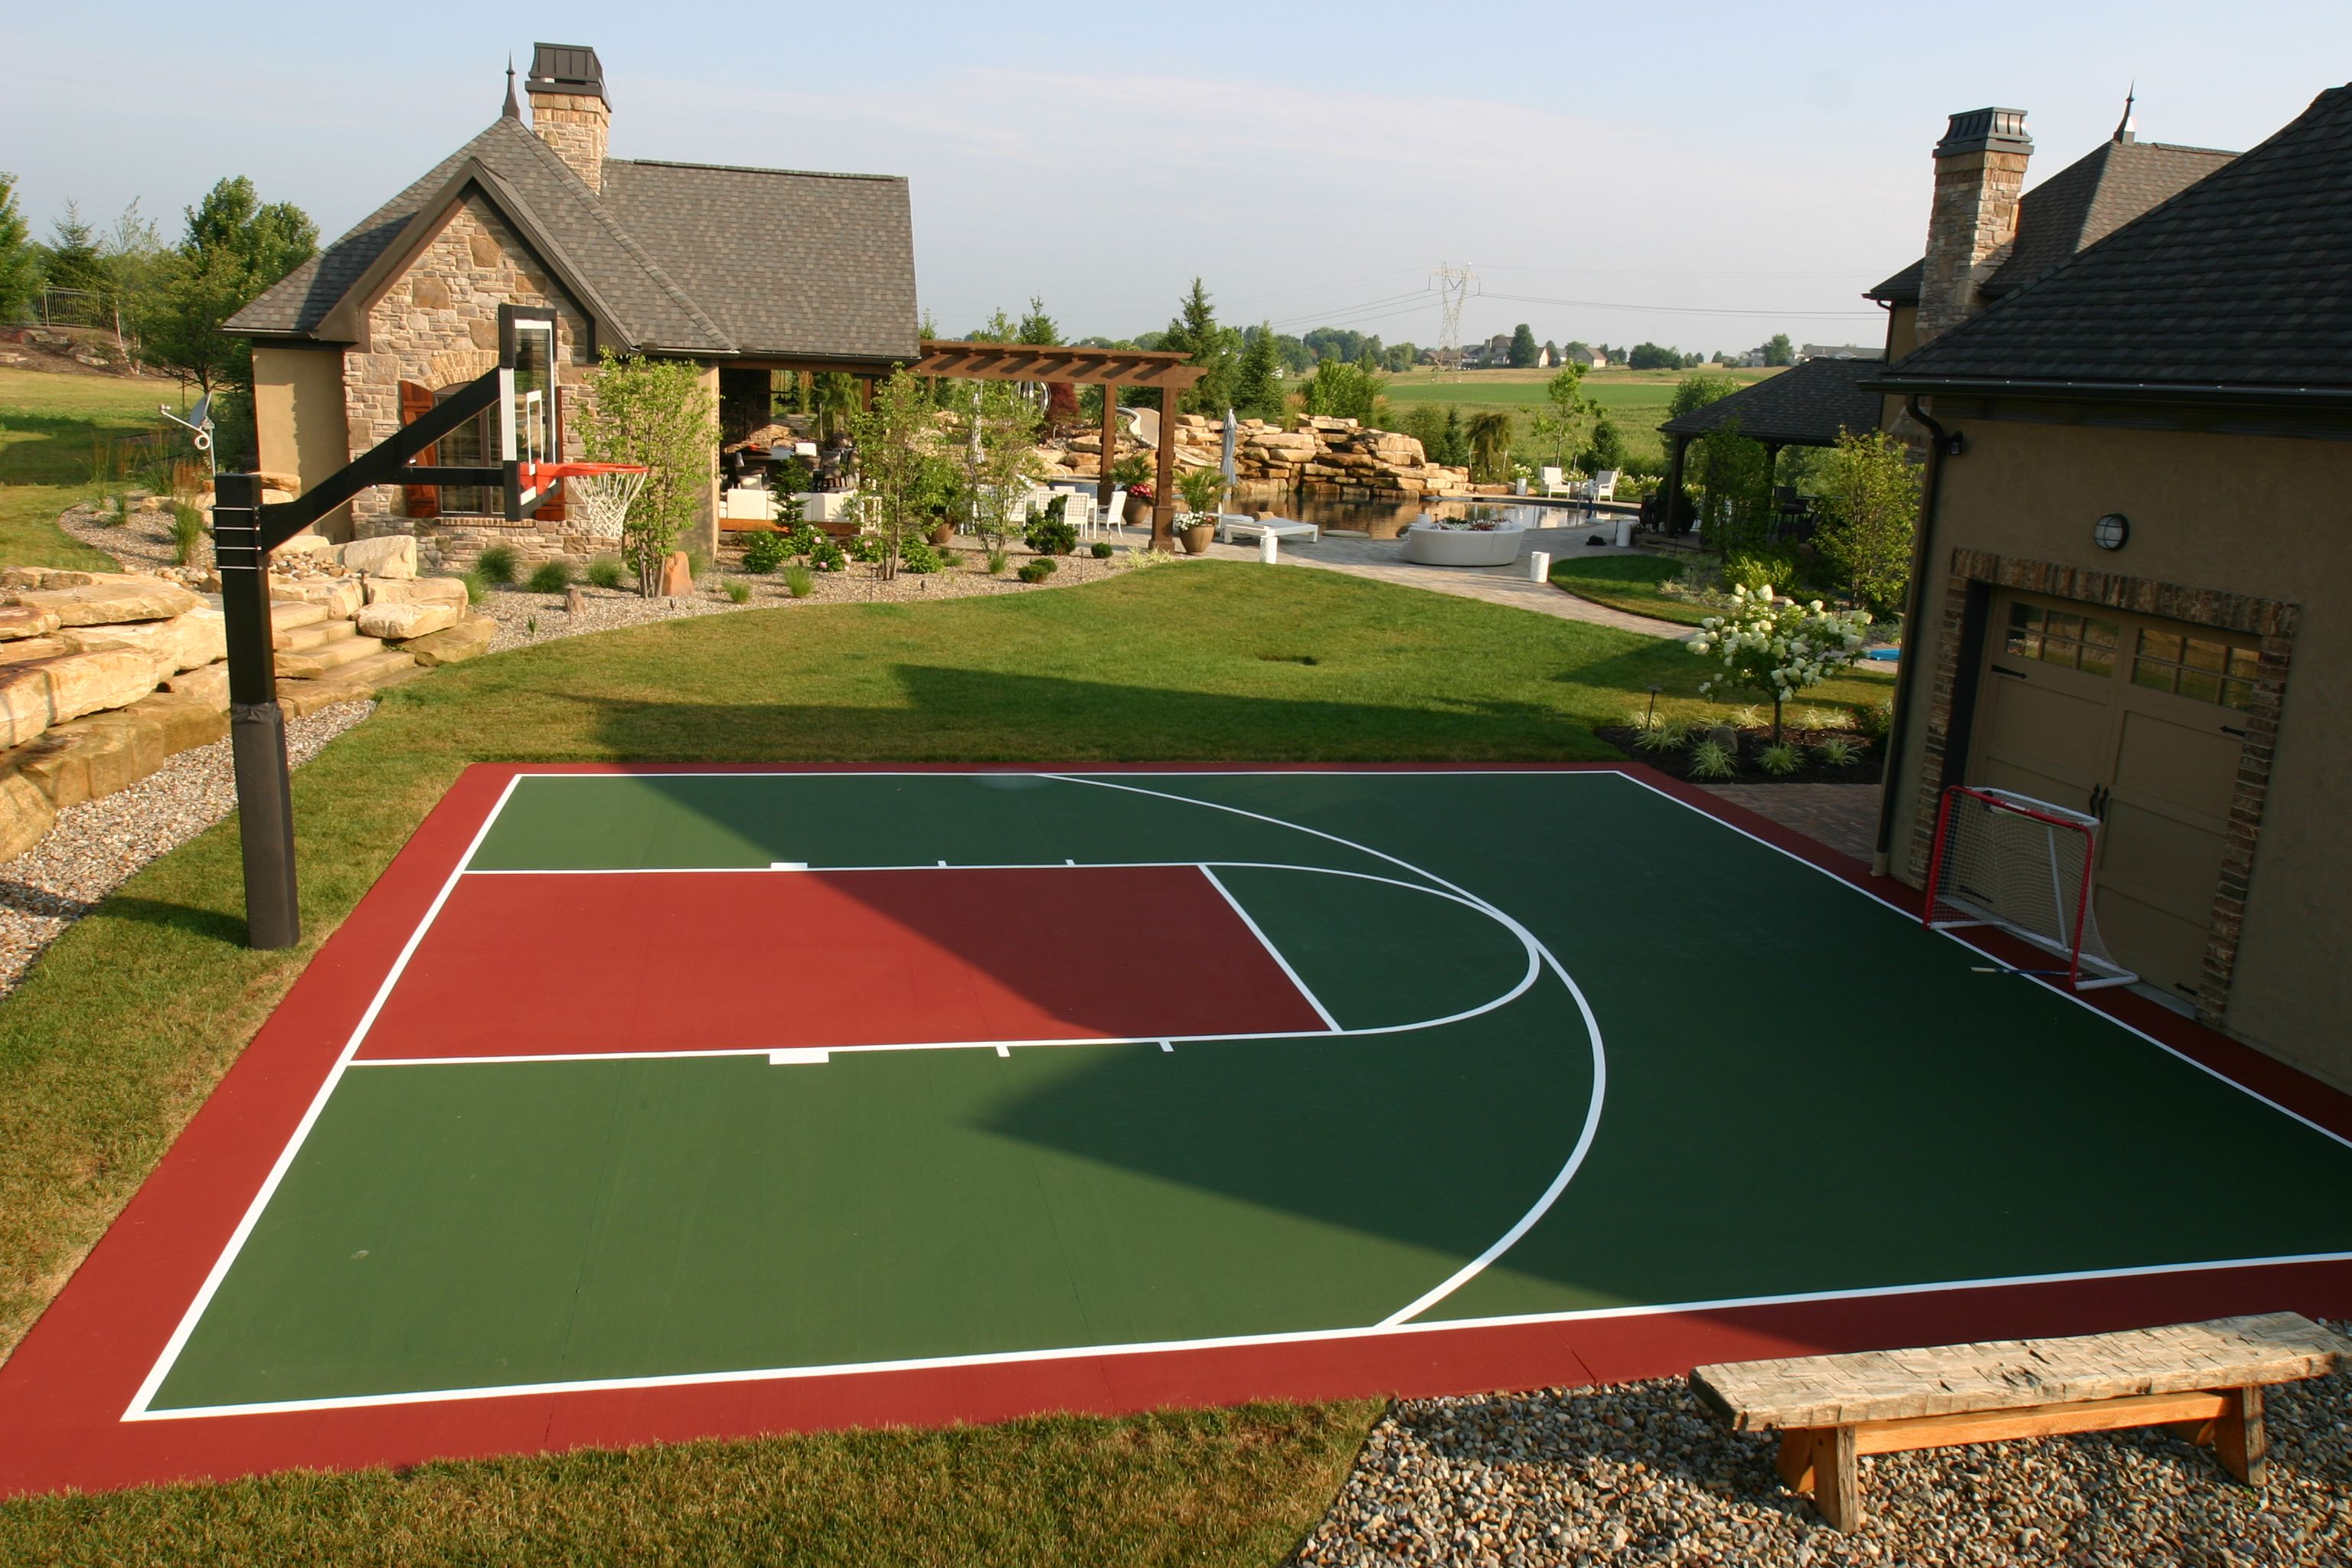 18.SIMPHOME.COM backyard recreation areas can include sport courts